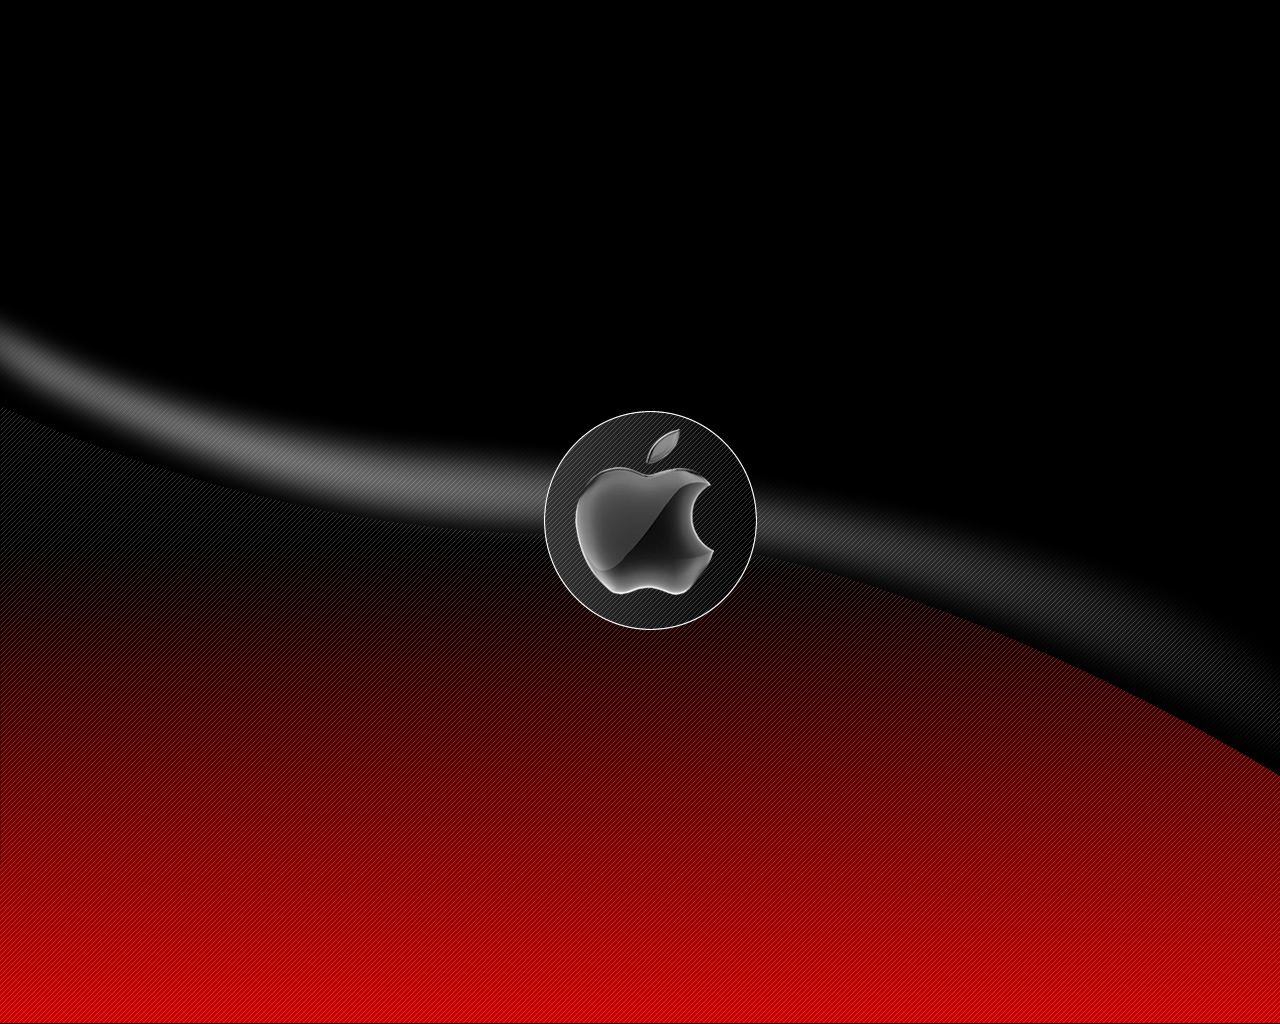 Black And Red Apple Mac Wallpaper For Android #7815 Wallpaper ...